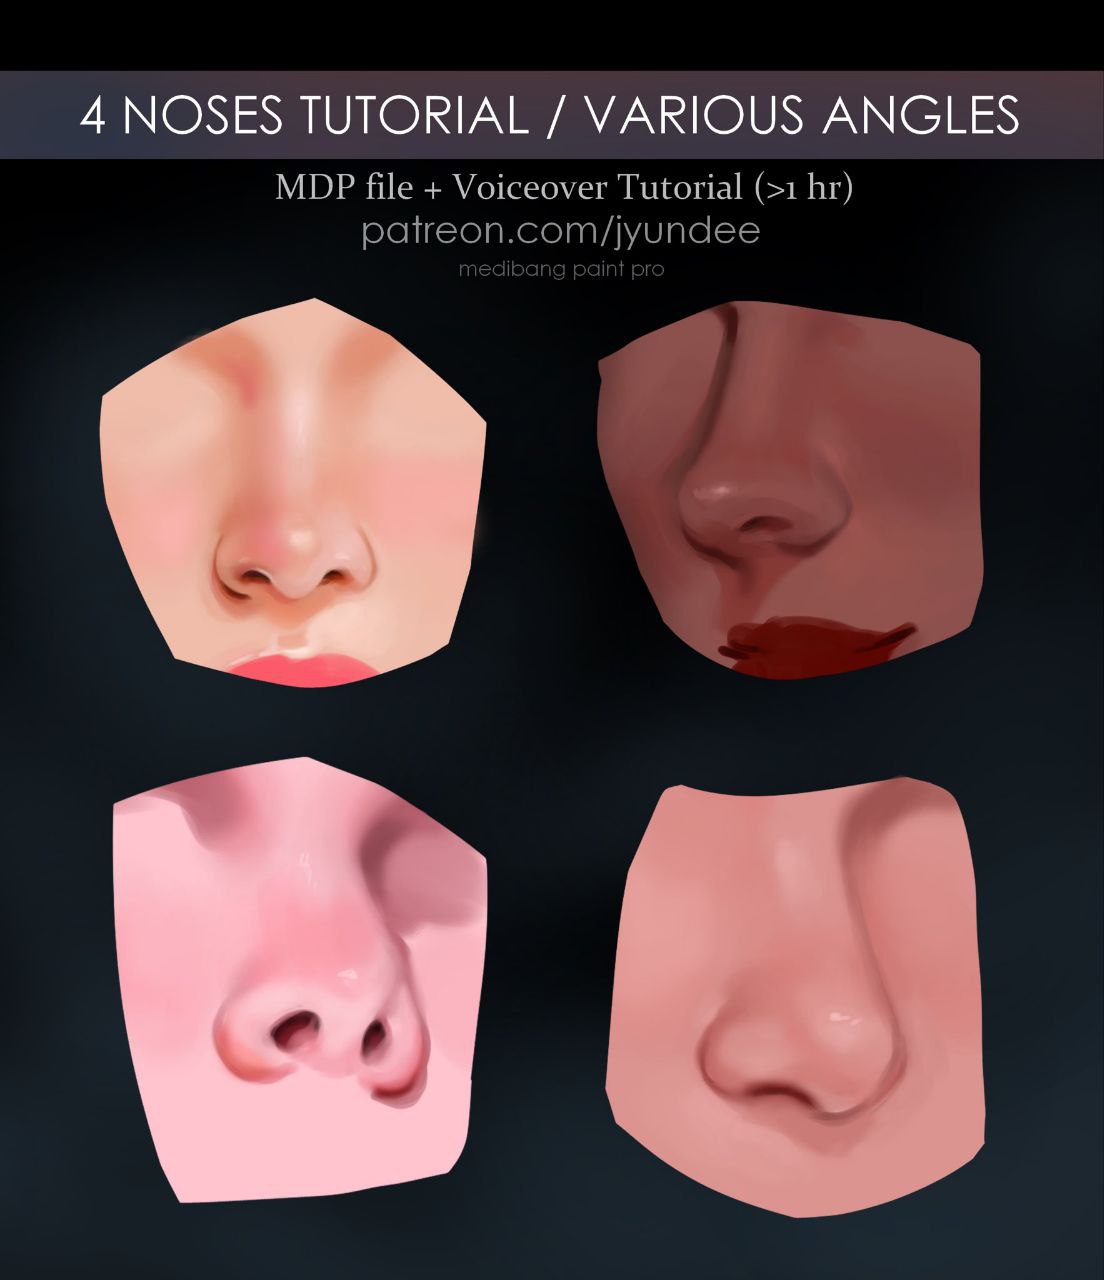 [Patreon] January Nose Tutorial by JYUNDEE